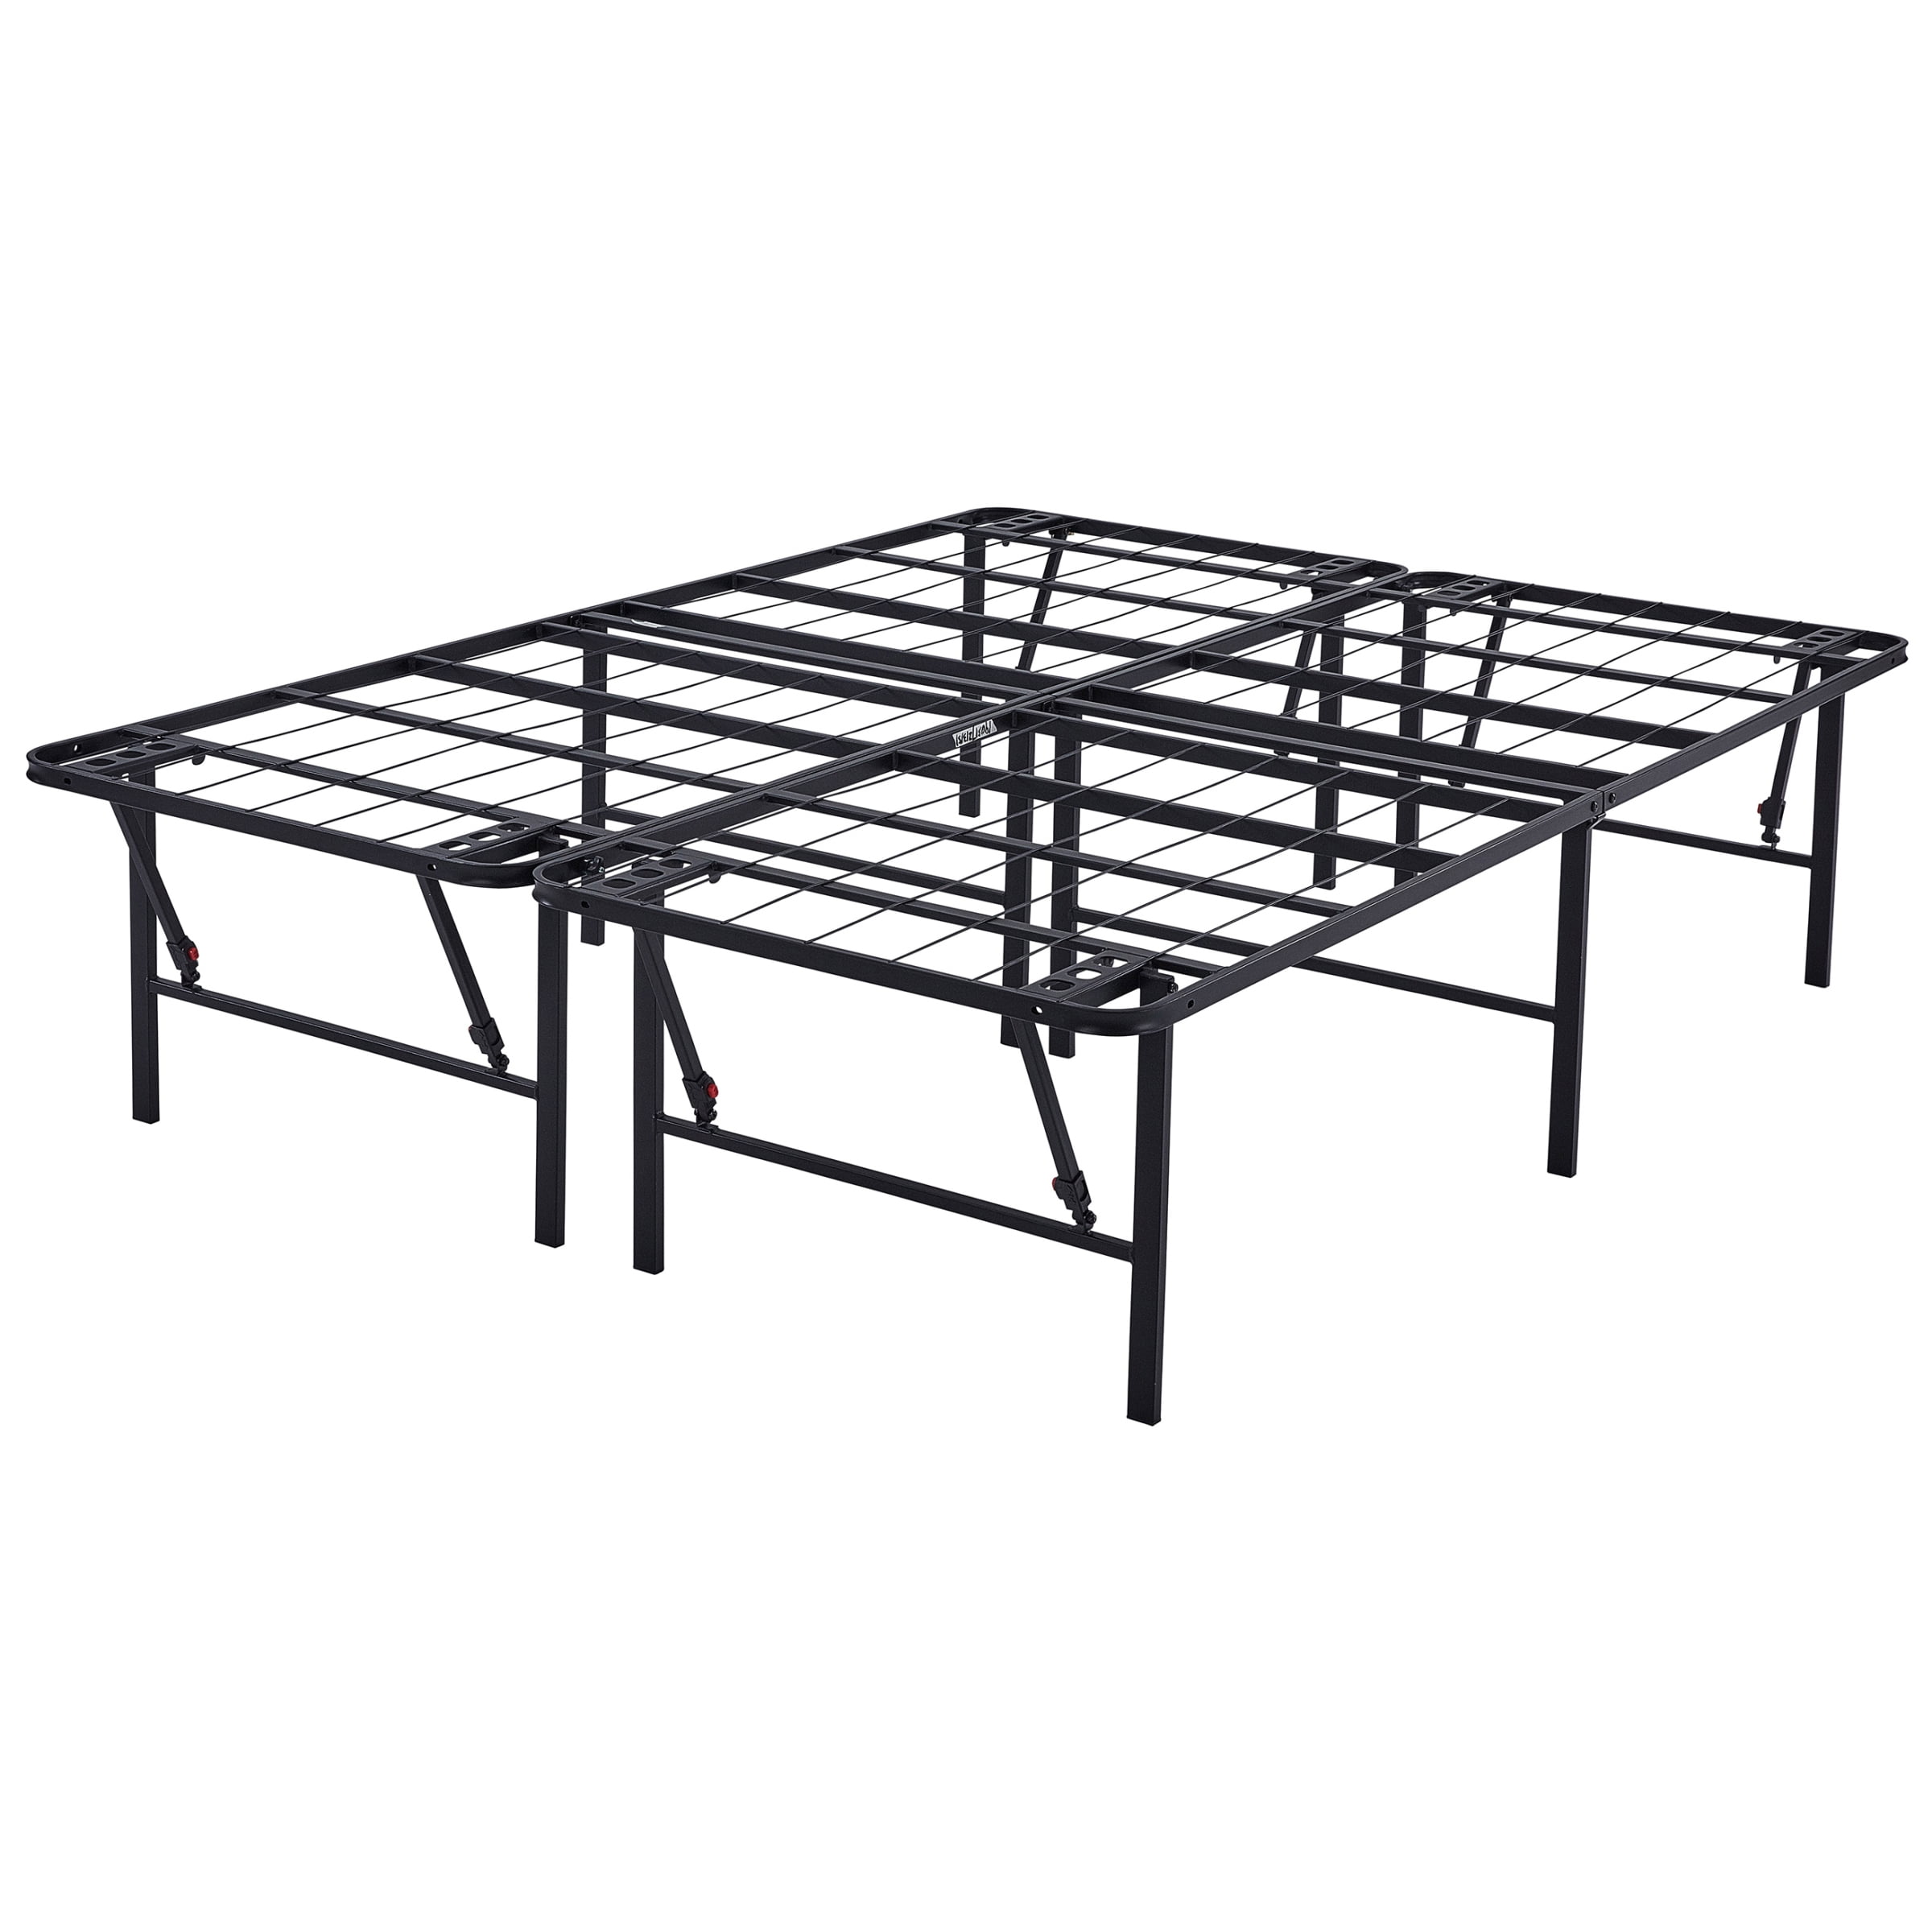 Mainstays 18 High Profile Foldable, Foldable Metal Bed Frame